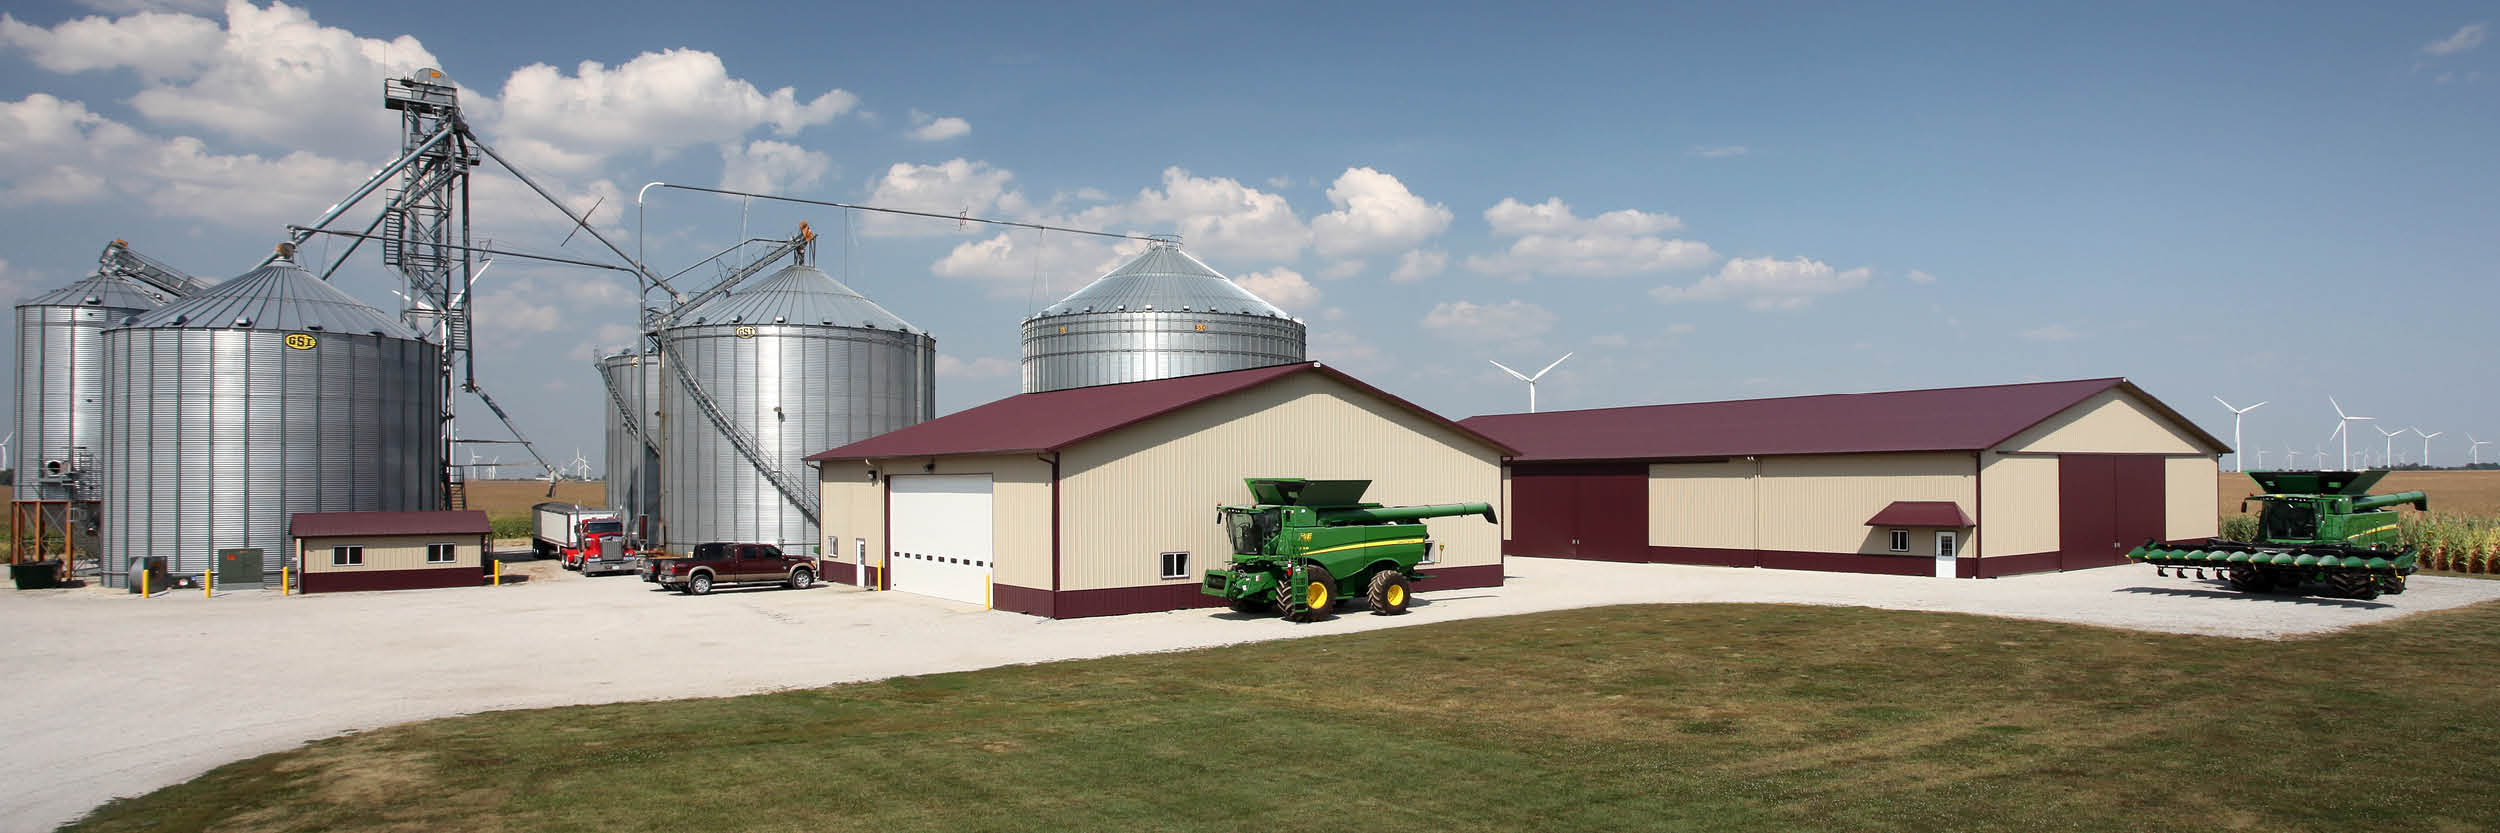 How to Finance Your Farm Building with Compeer Financial